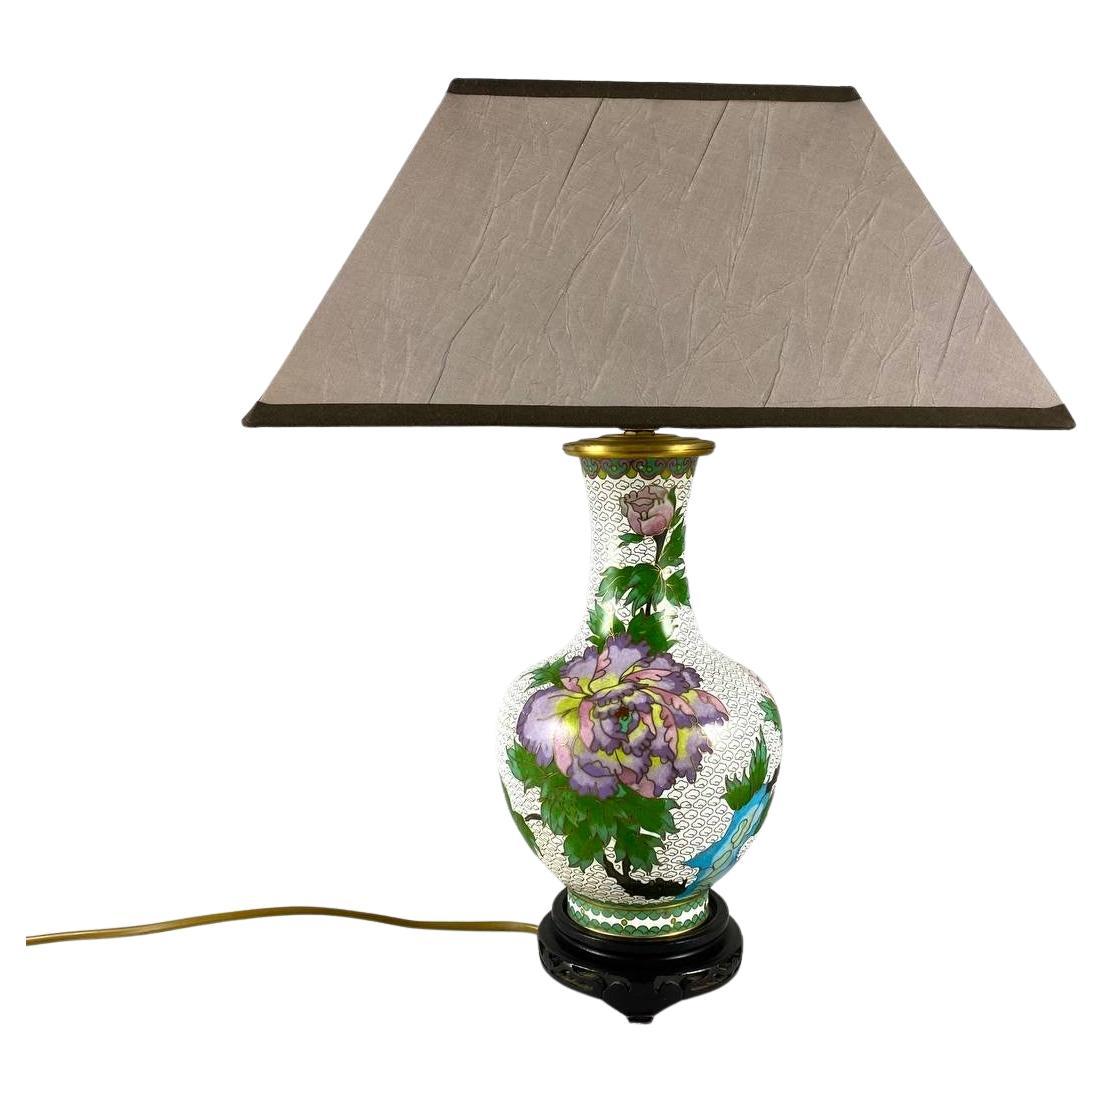 Vintage Cloisonné Table Lamp with Peony Decoration, China, 1970s For Sale